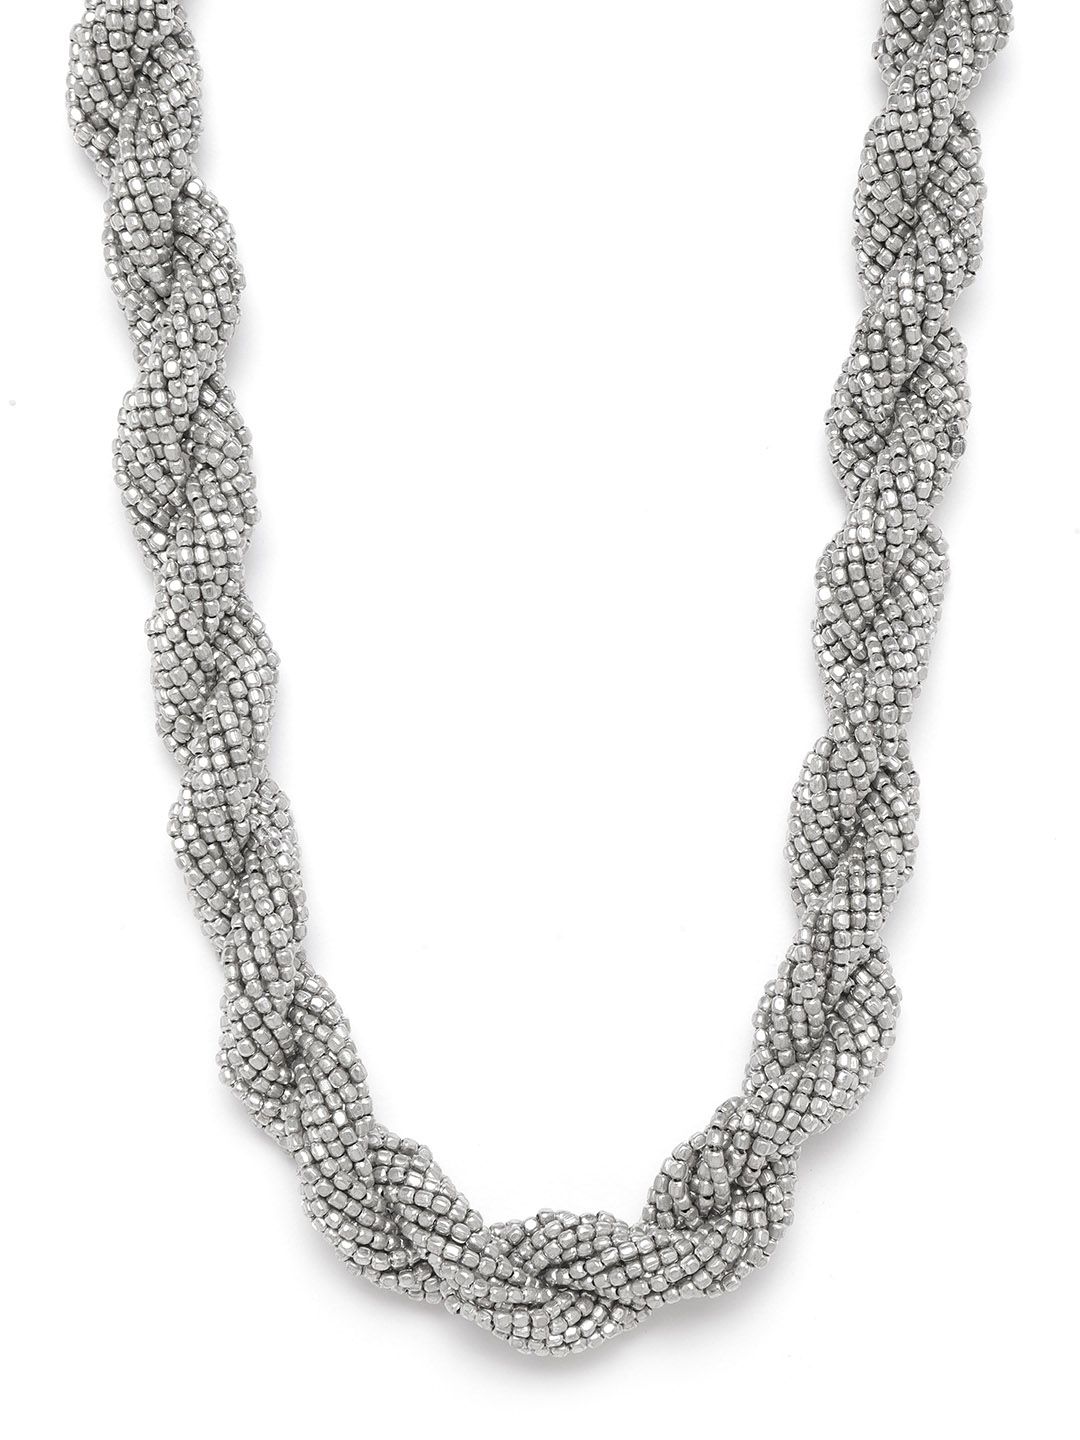 RICHEERA Oxidised Silver-Plated Beaded Necklace Price in India